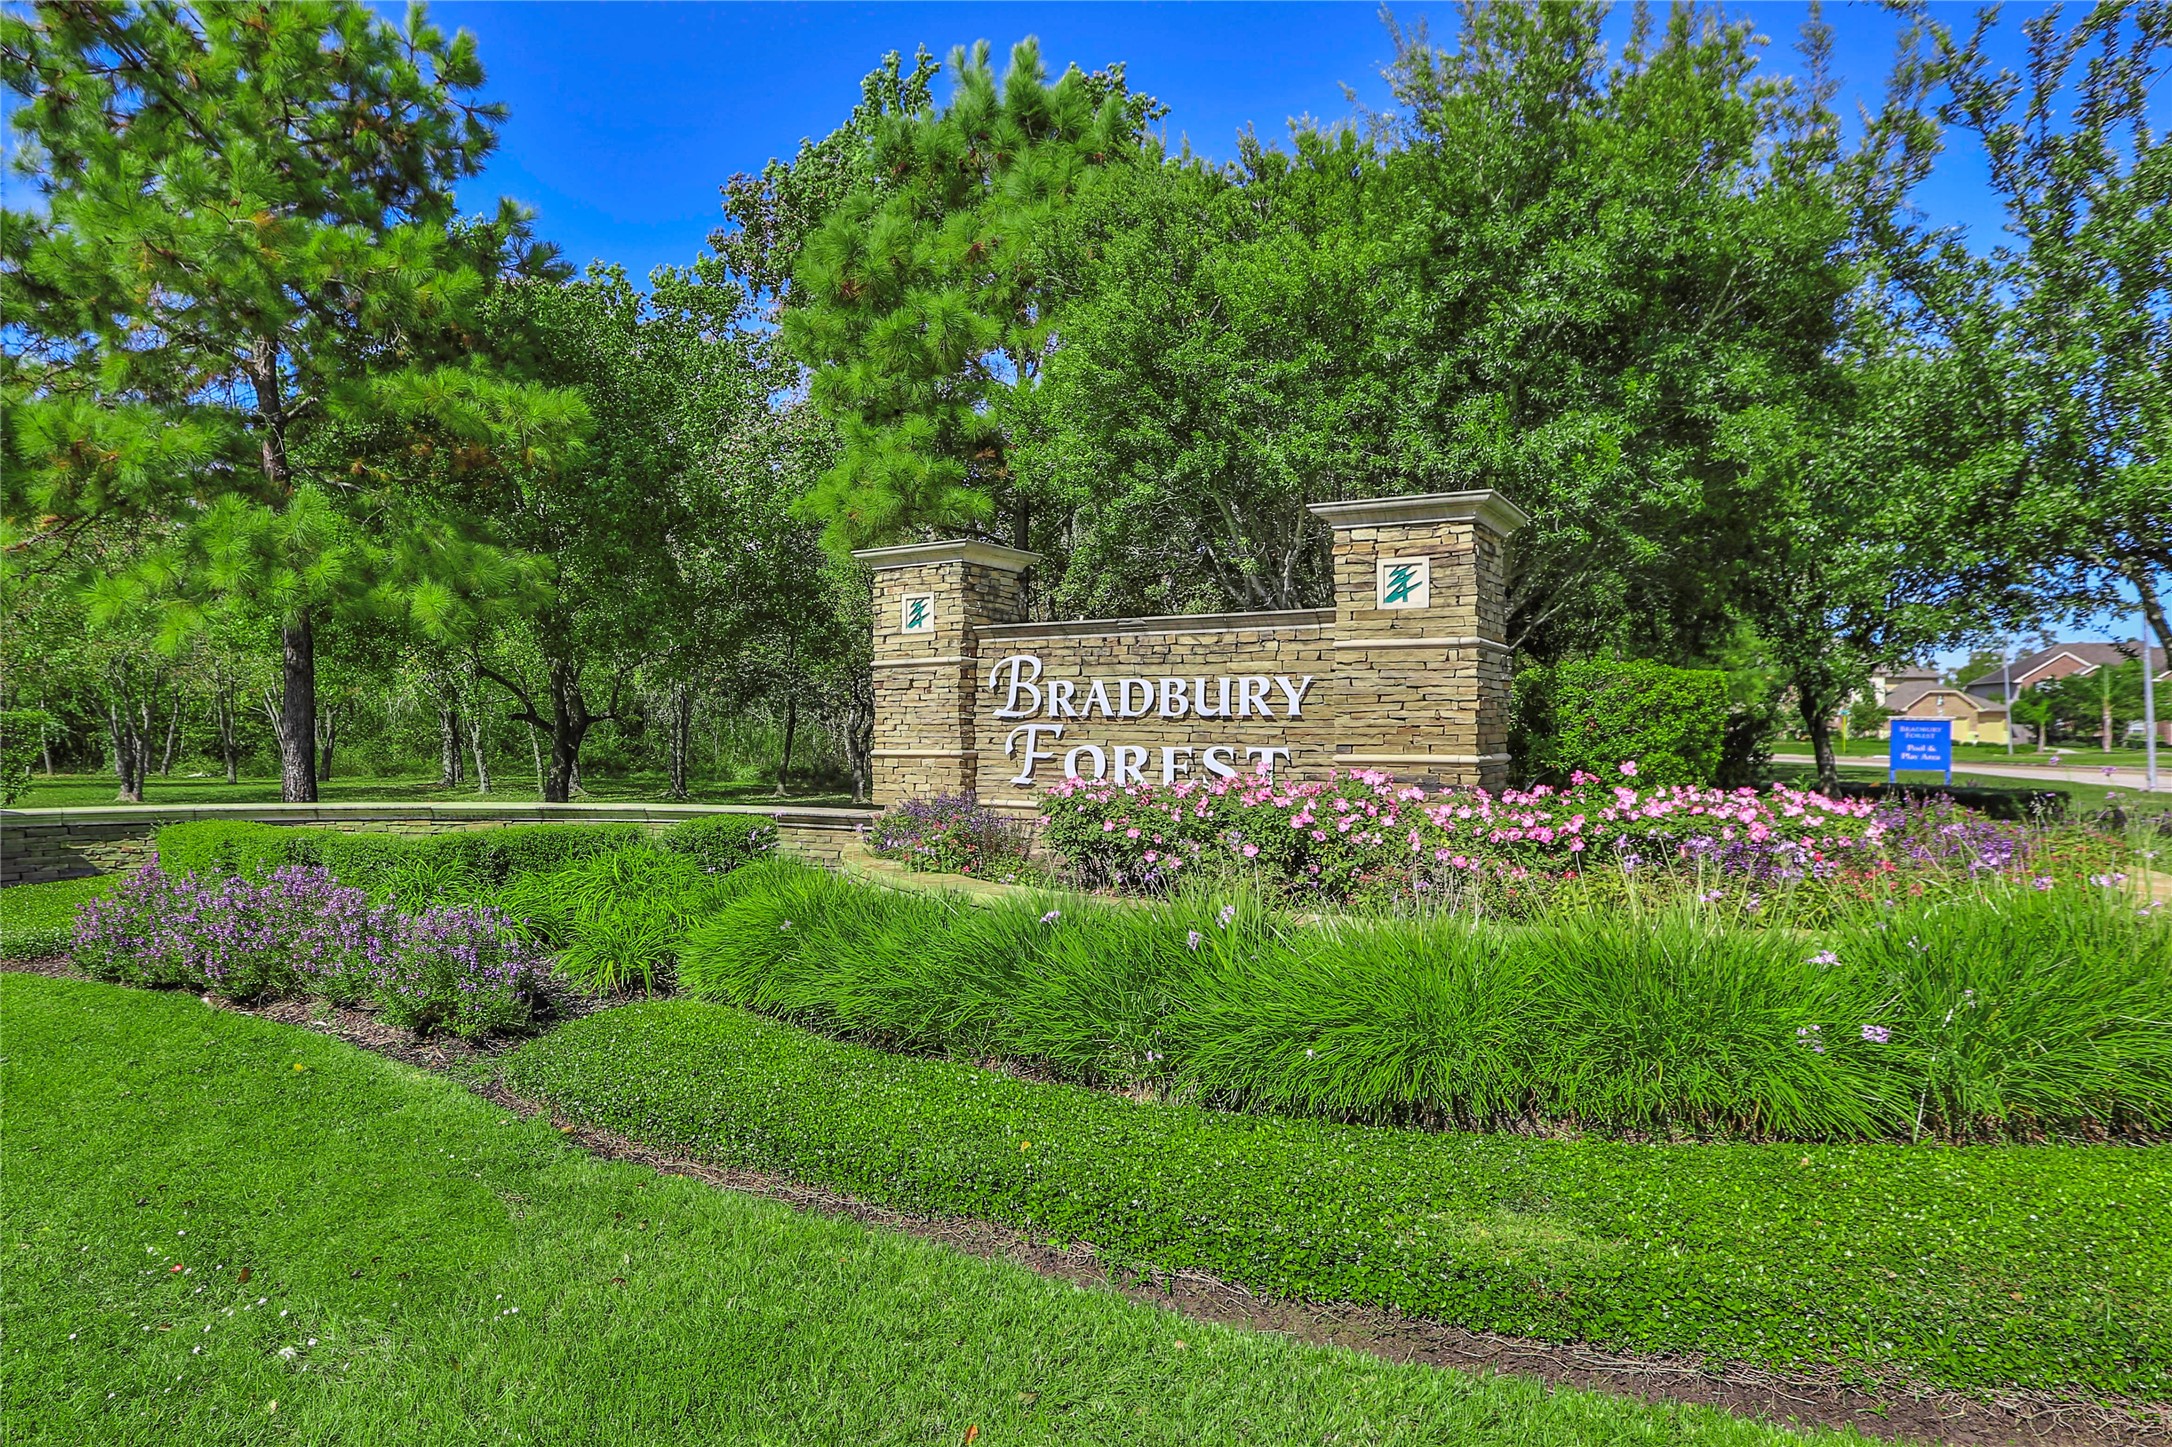 The Bradbury Forest neighborhood is located between Houston and The Woodlands in Spring, Texas, just east of I-45. Students living in Bradbury Forest are zoned for the highly acclaimed Spring Independent School District.
